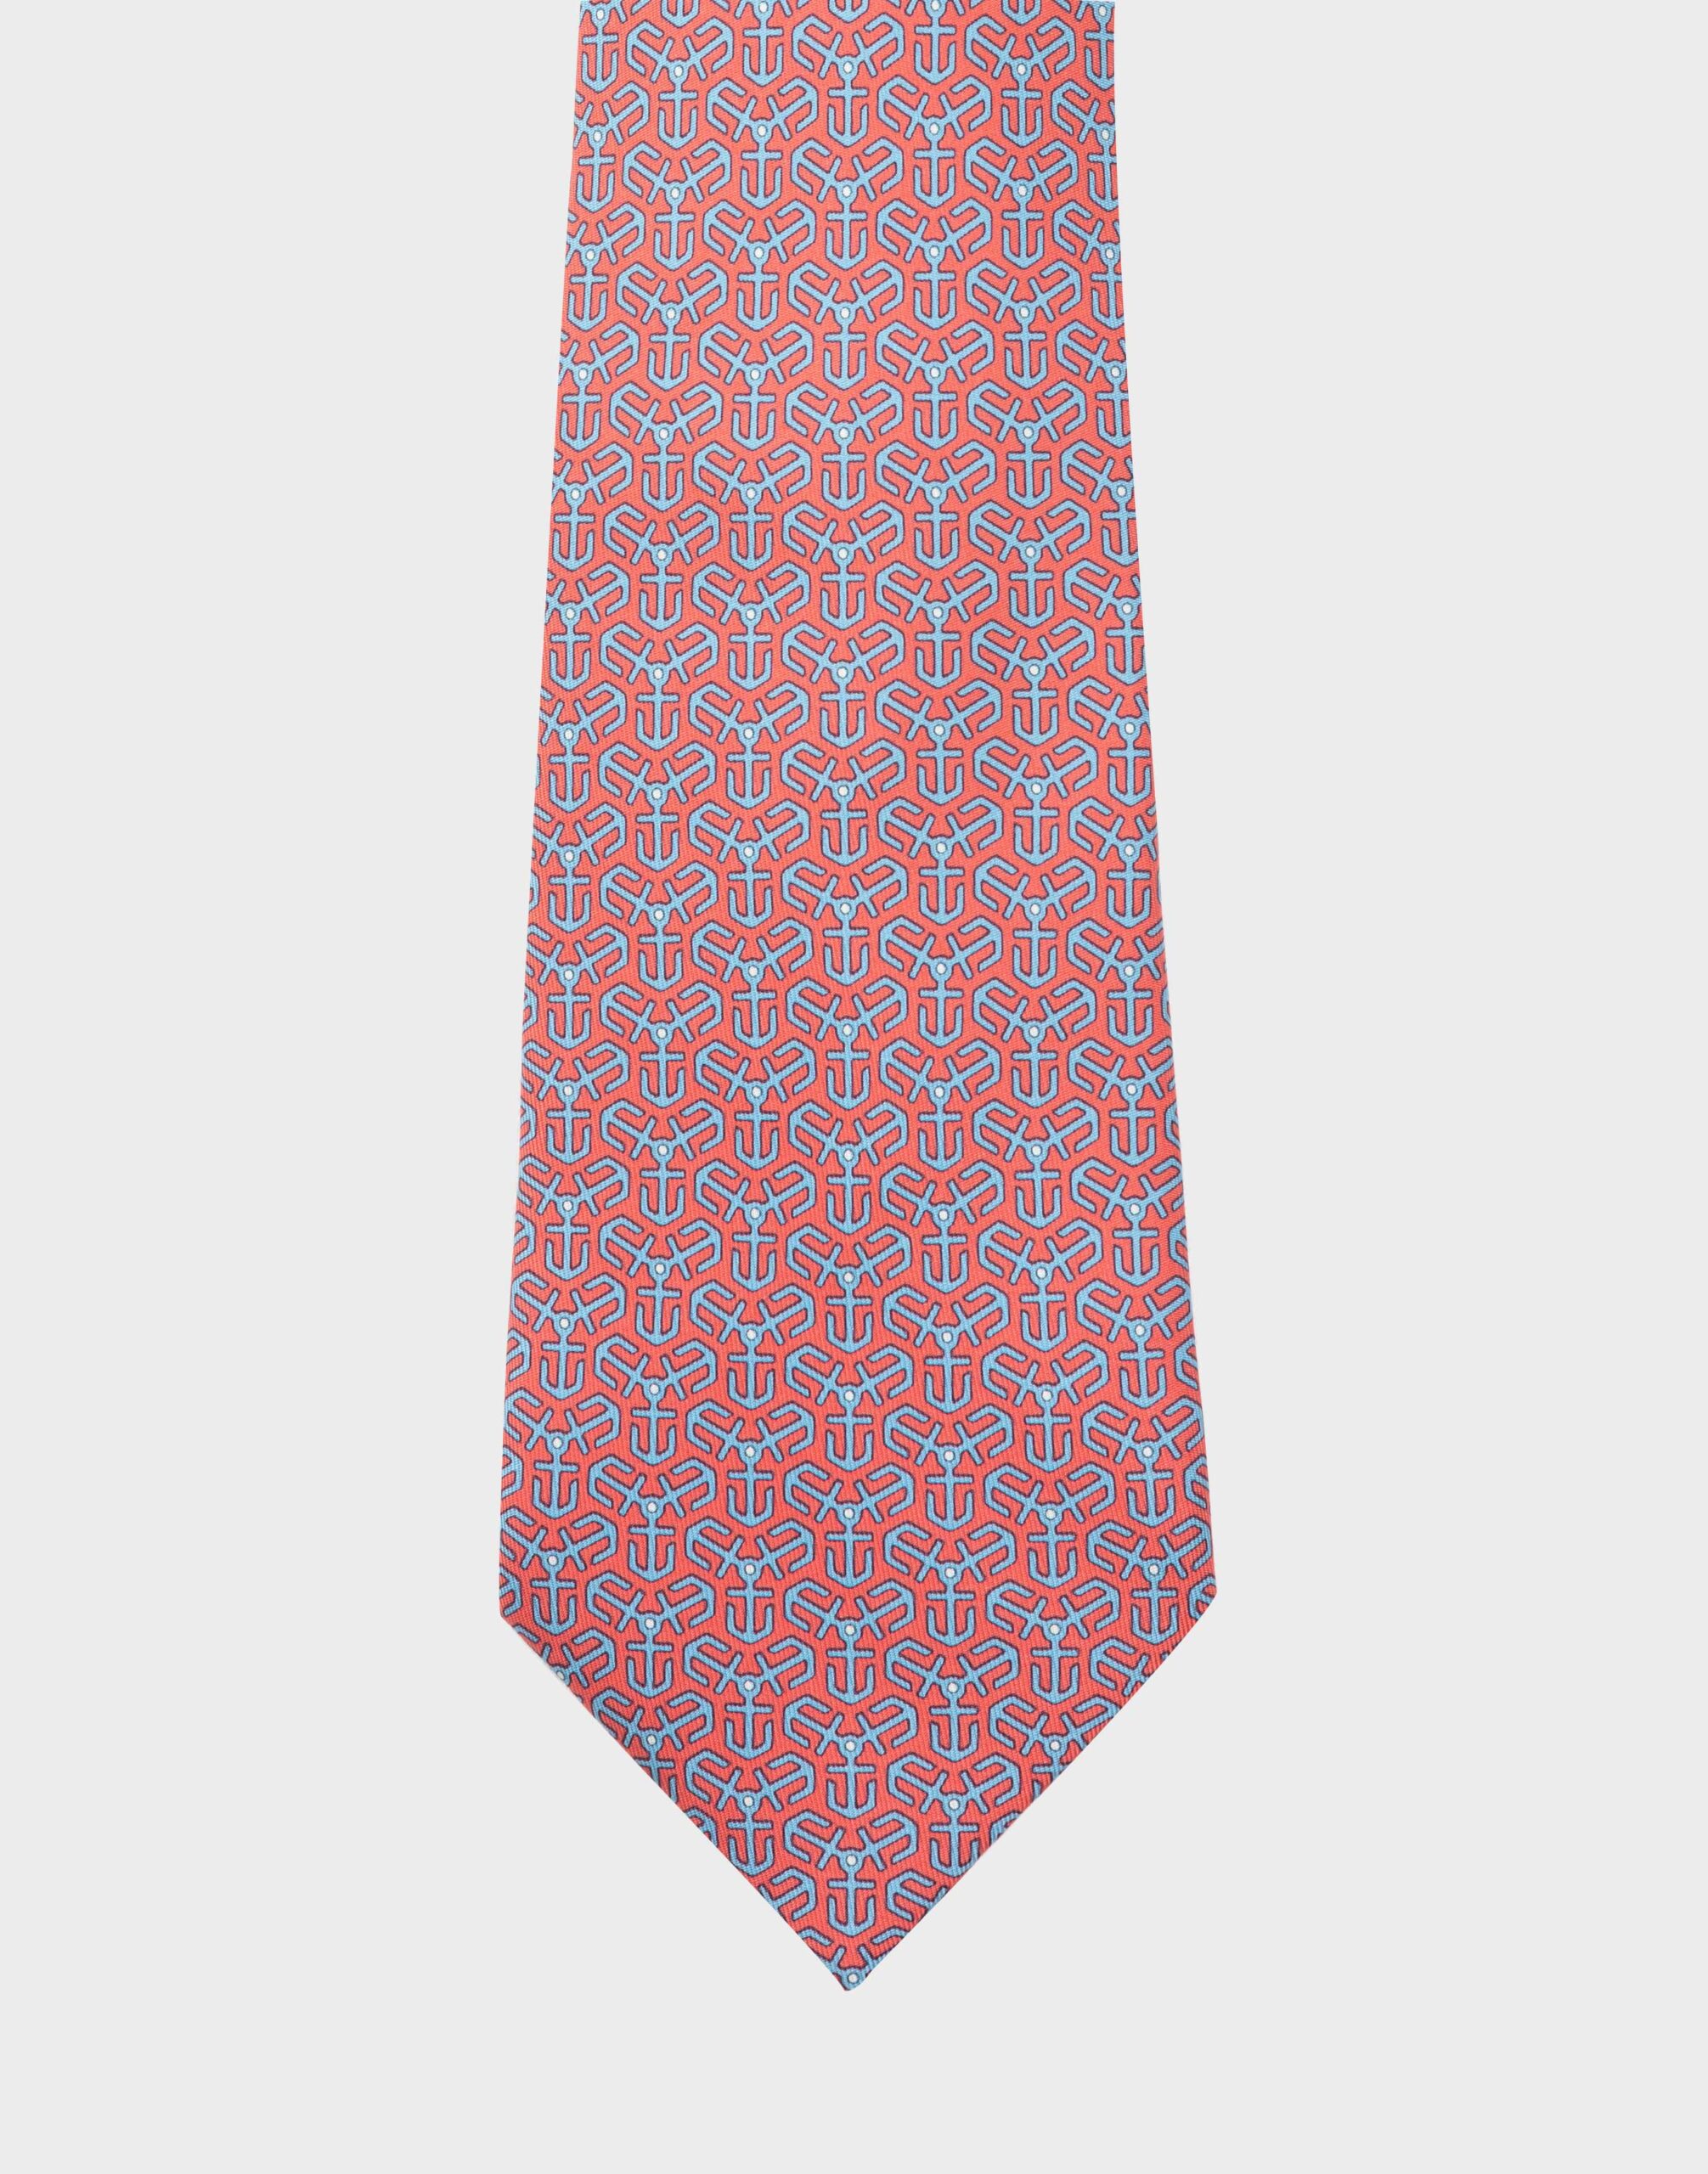 Coral tie in 100% silk with an all-over pattern of blue anchors